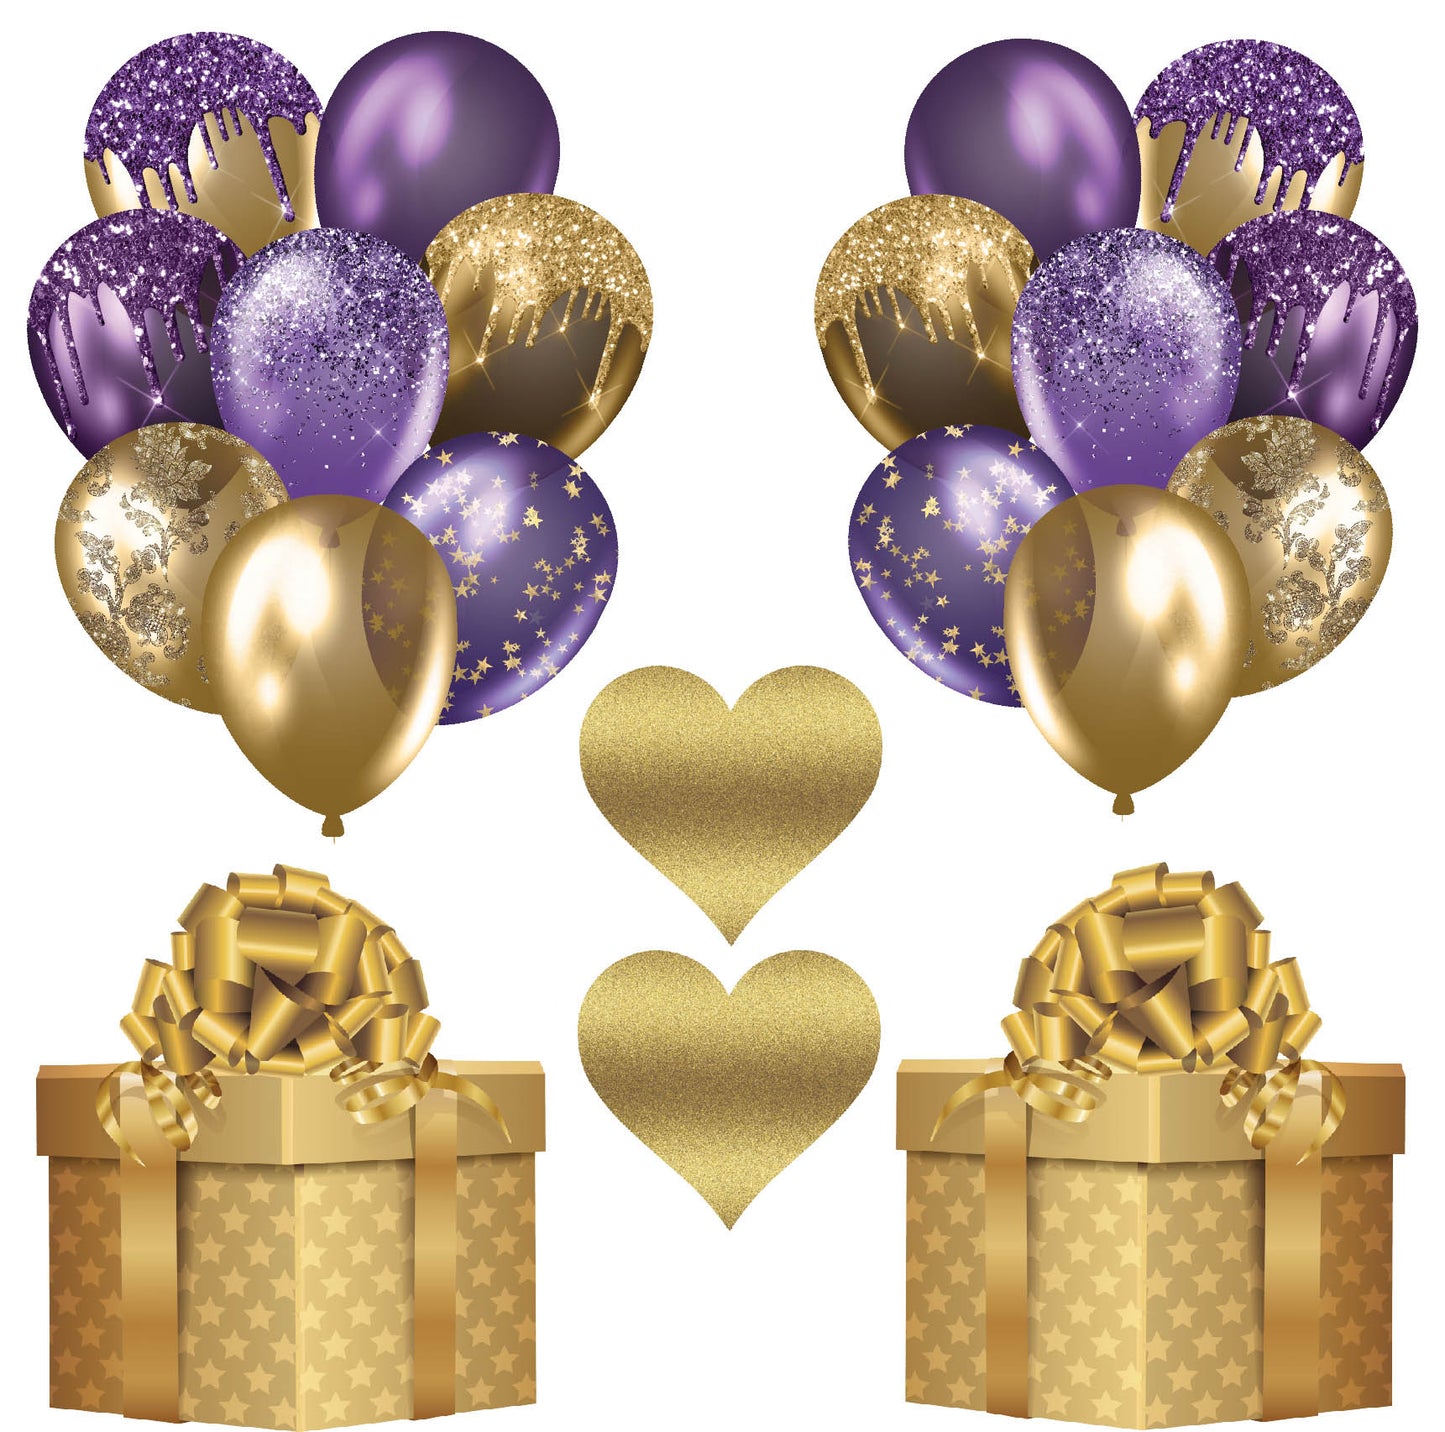 Purple and Gold Balloons Half Sheet (Must Purchase 2 Half sheets - You Can Mix & Match)